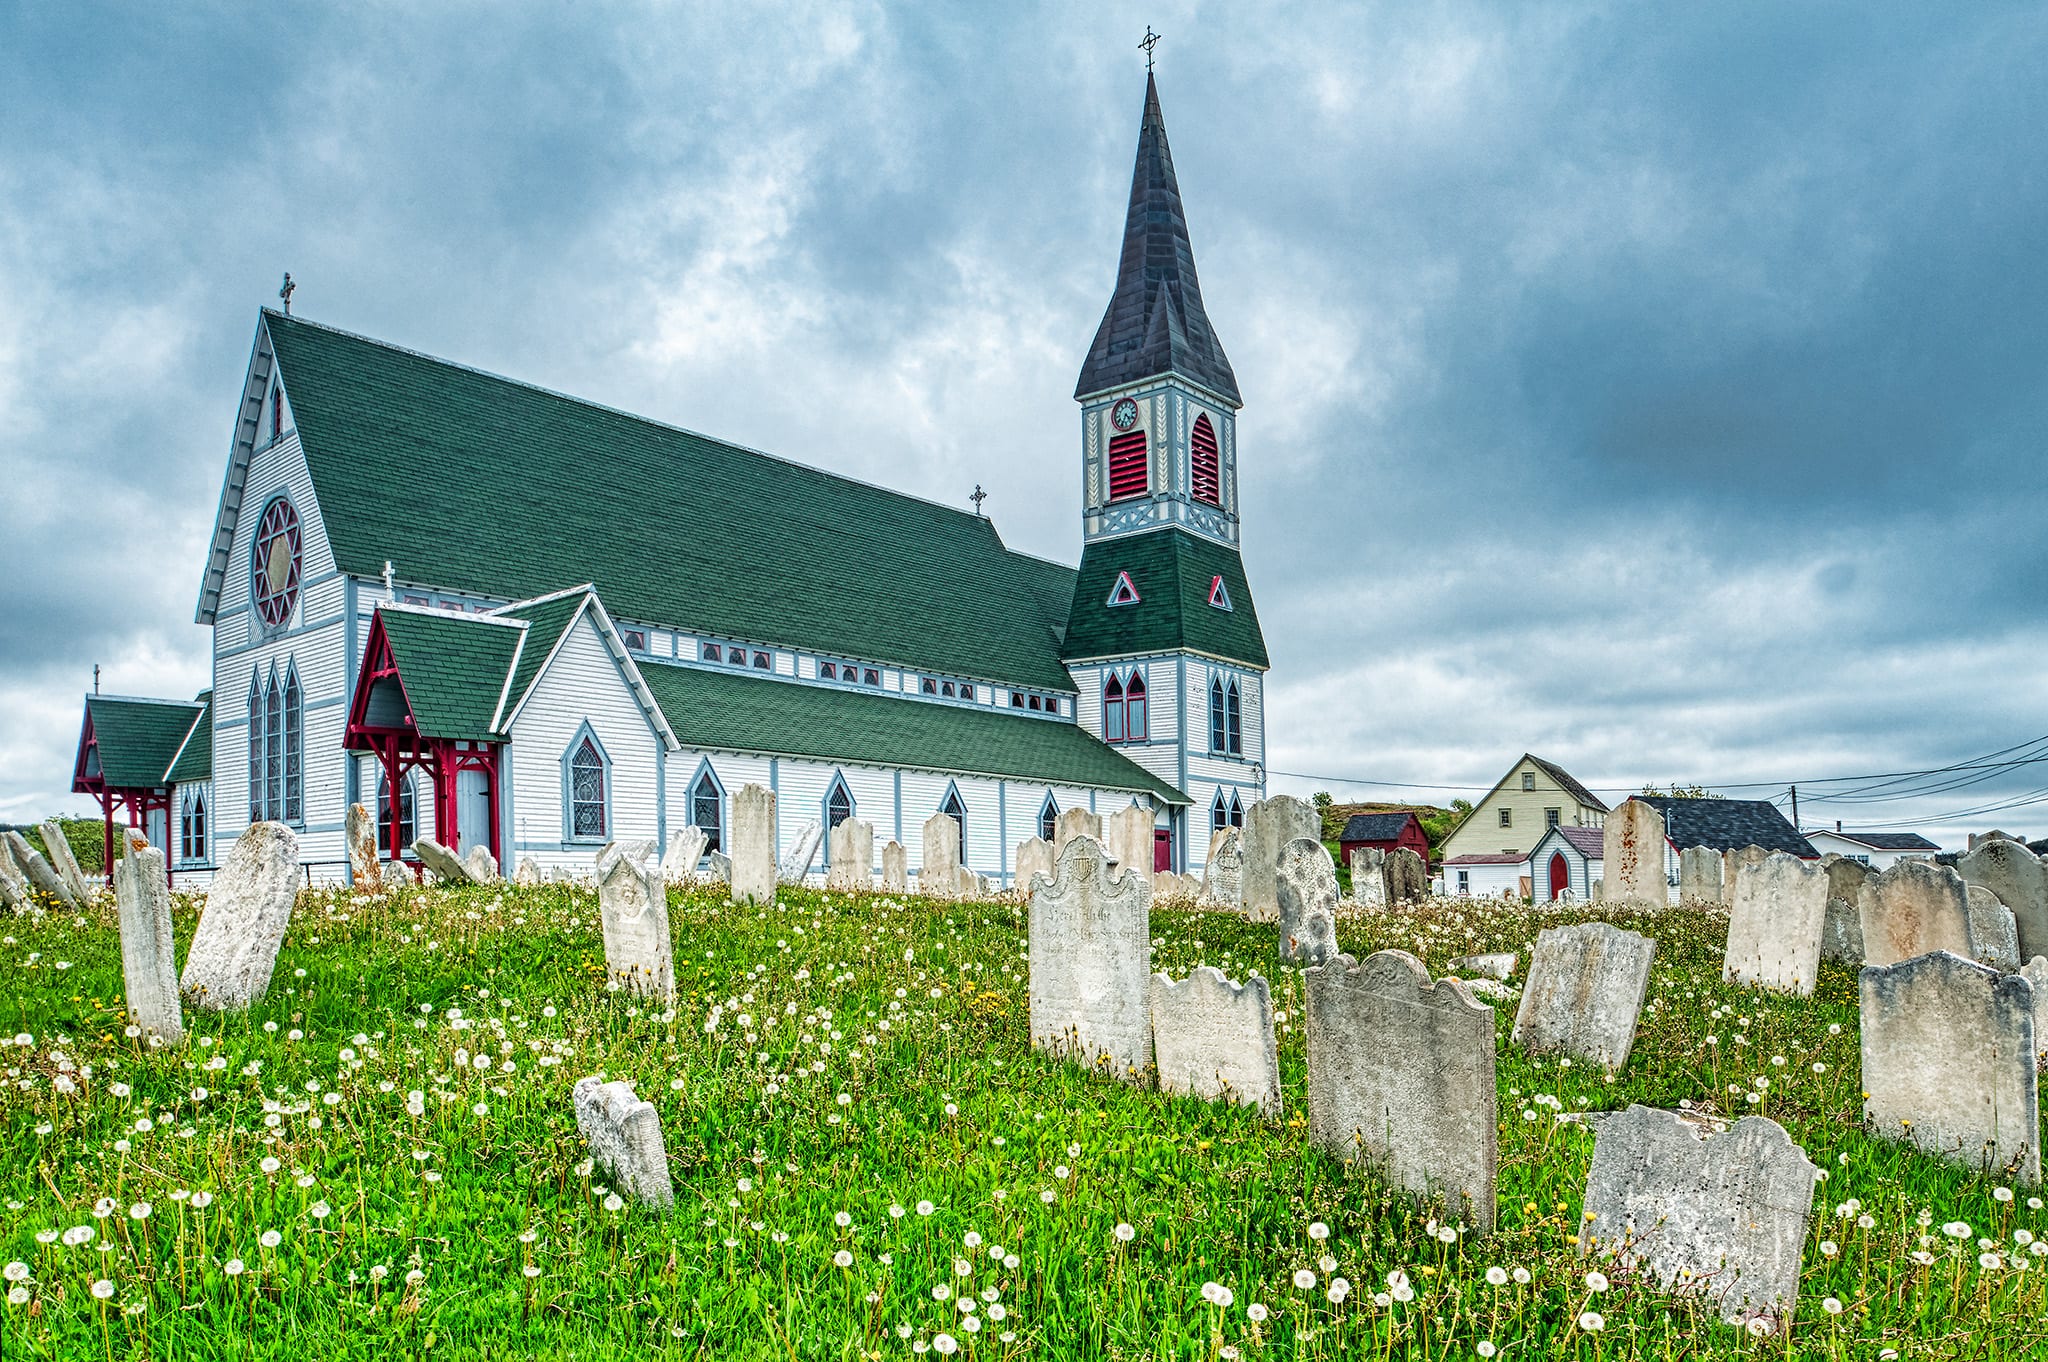 St. Paul's Anglican Church, an excellent example of the Gothic Revival style, in the village of Trinity, Newfoundland, Canada.